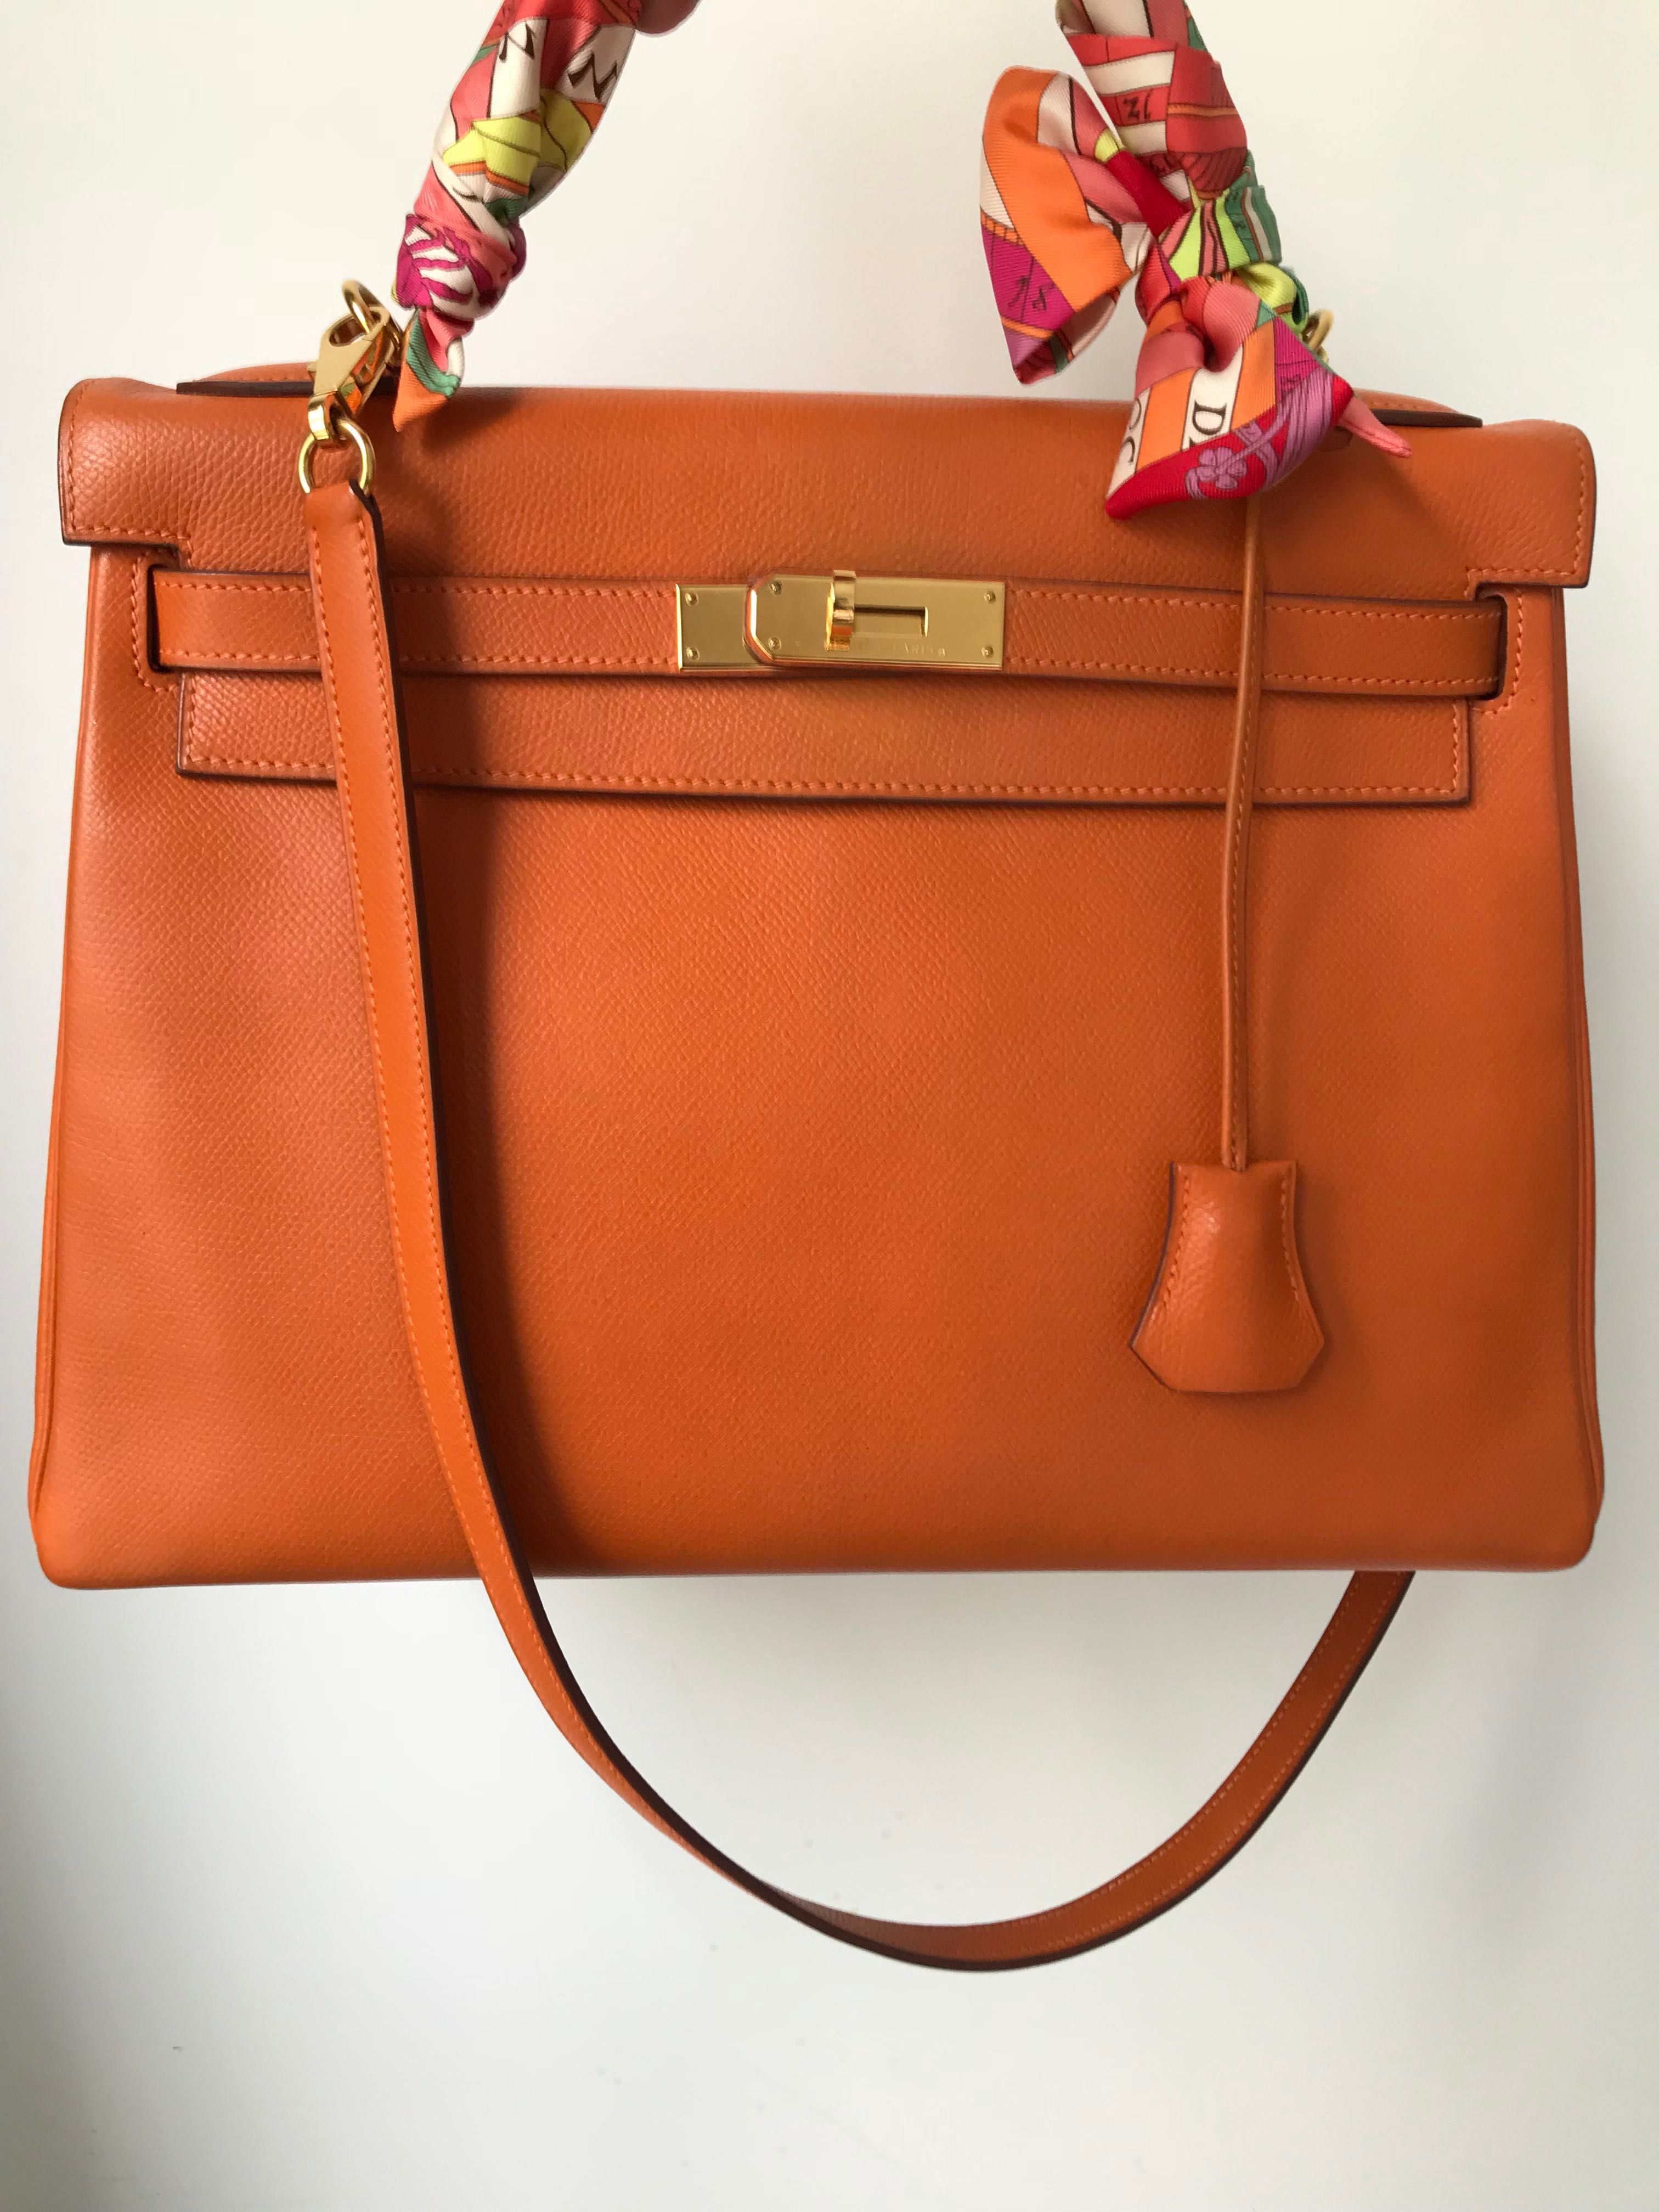 Hermes 32cm Rose Tyrien Epsom Leather Kelly Bag with Gold Hardware., Lot  #58226